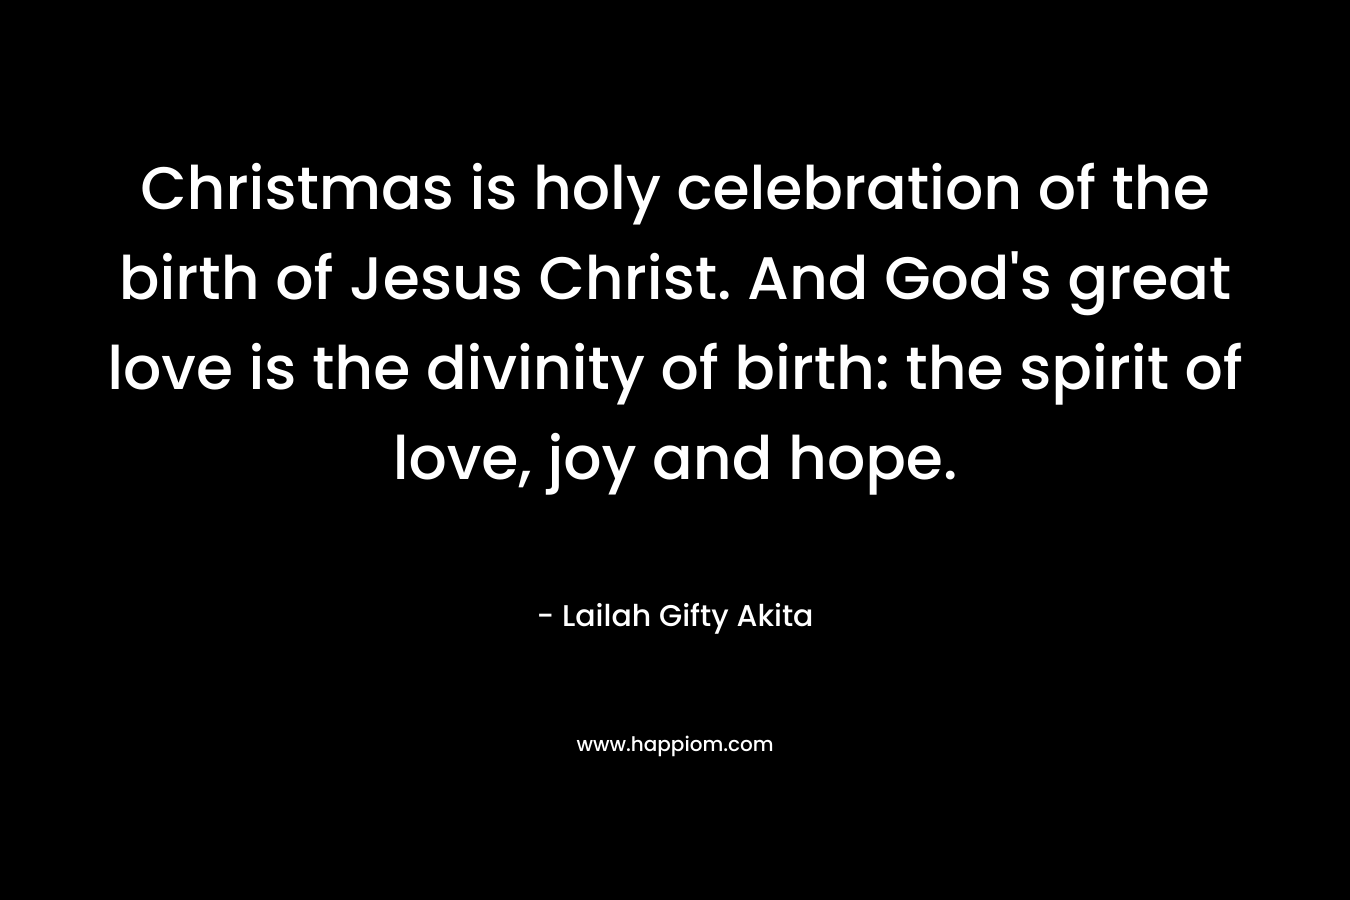 Christmas is holy celebration of the birth of Jesus Christ. And God's great love is the divinity of birth: the spirit of love, joy and hope.